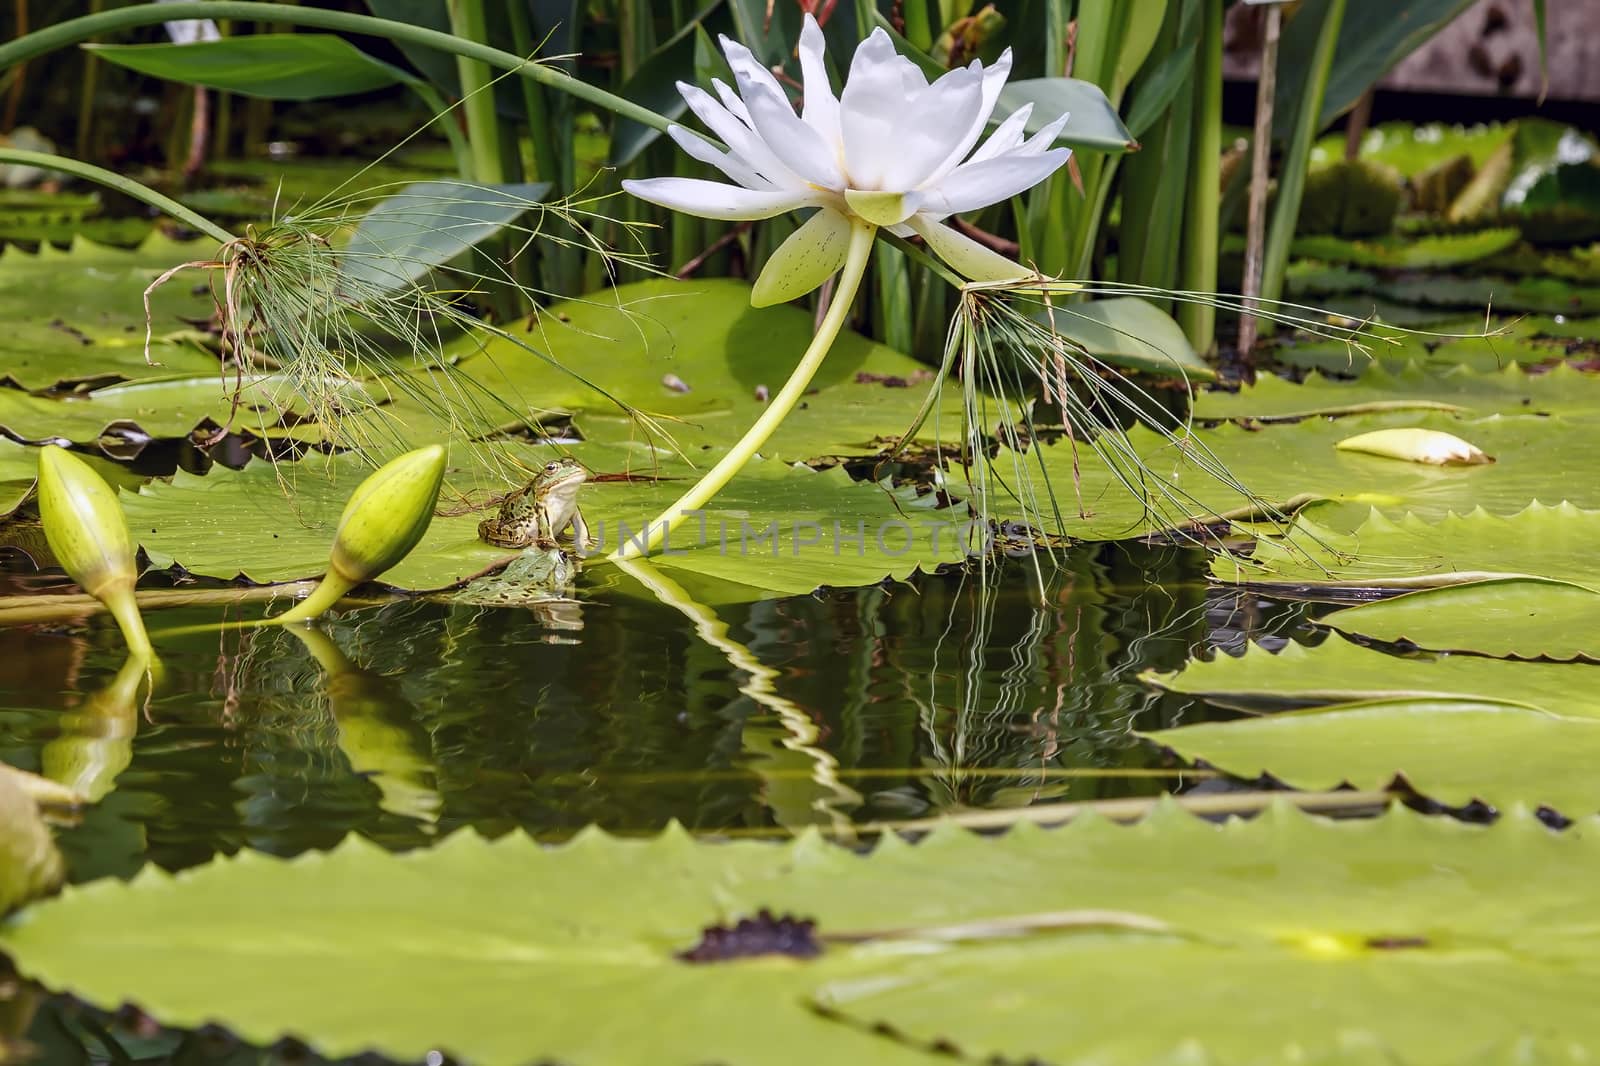 Two frogs, one on a lotus leaf by seka33